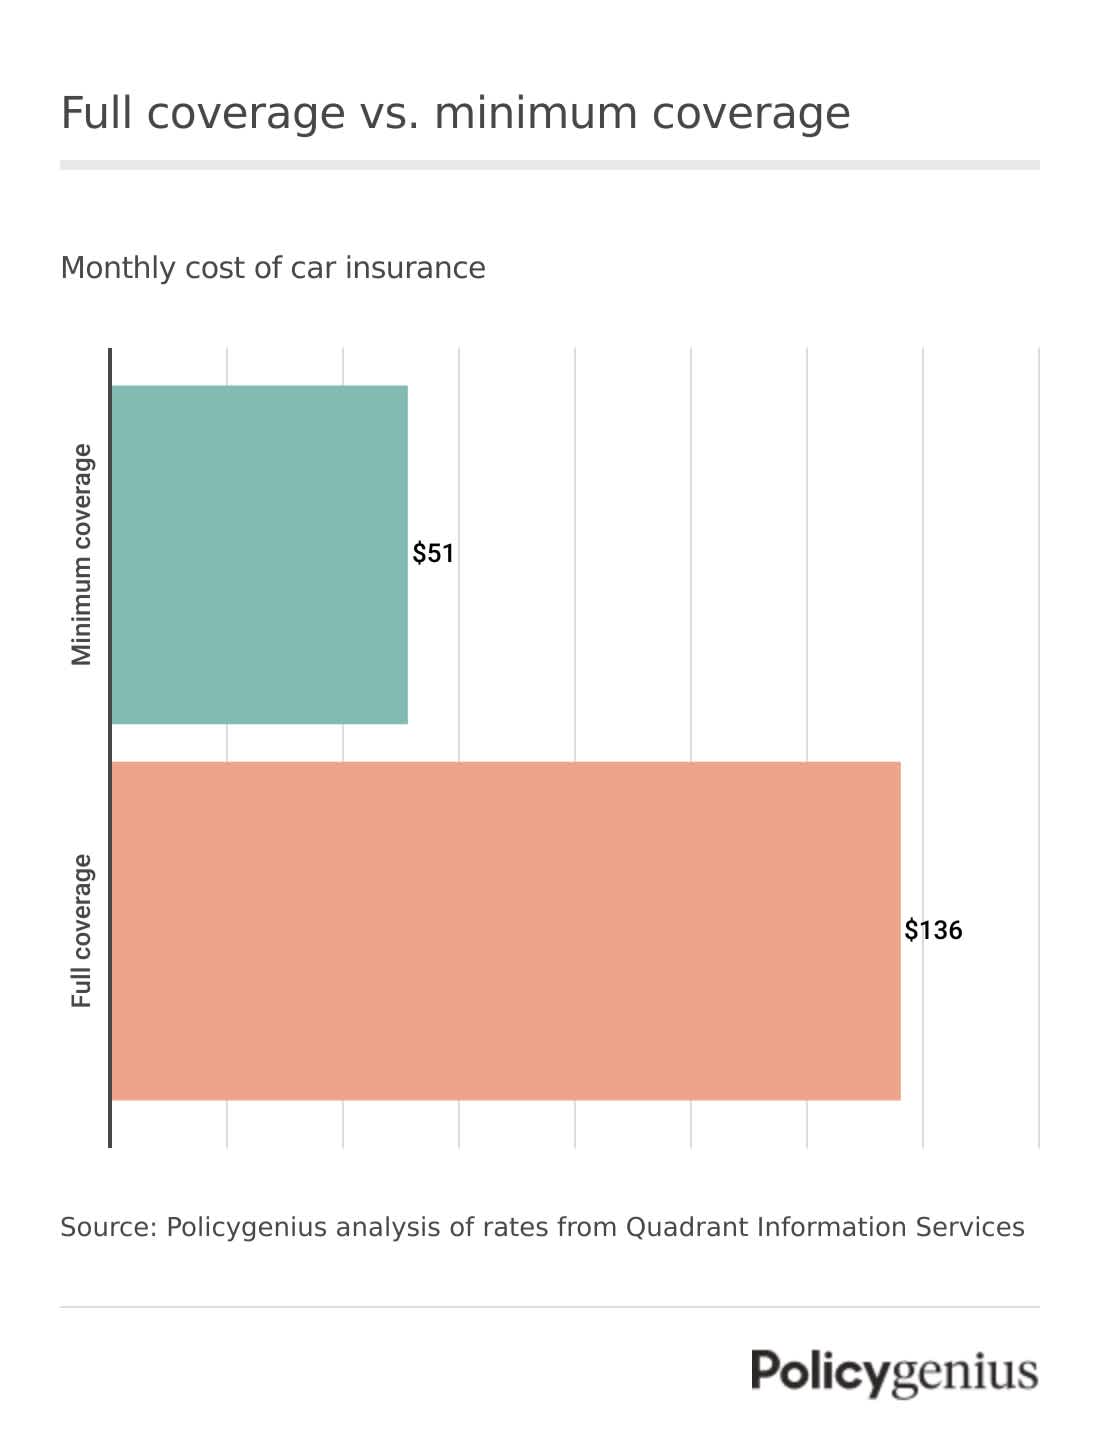 A bar graph of the cost of full and minimum coverage at the national level.